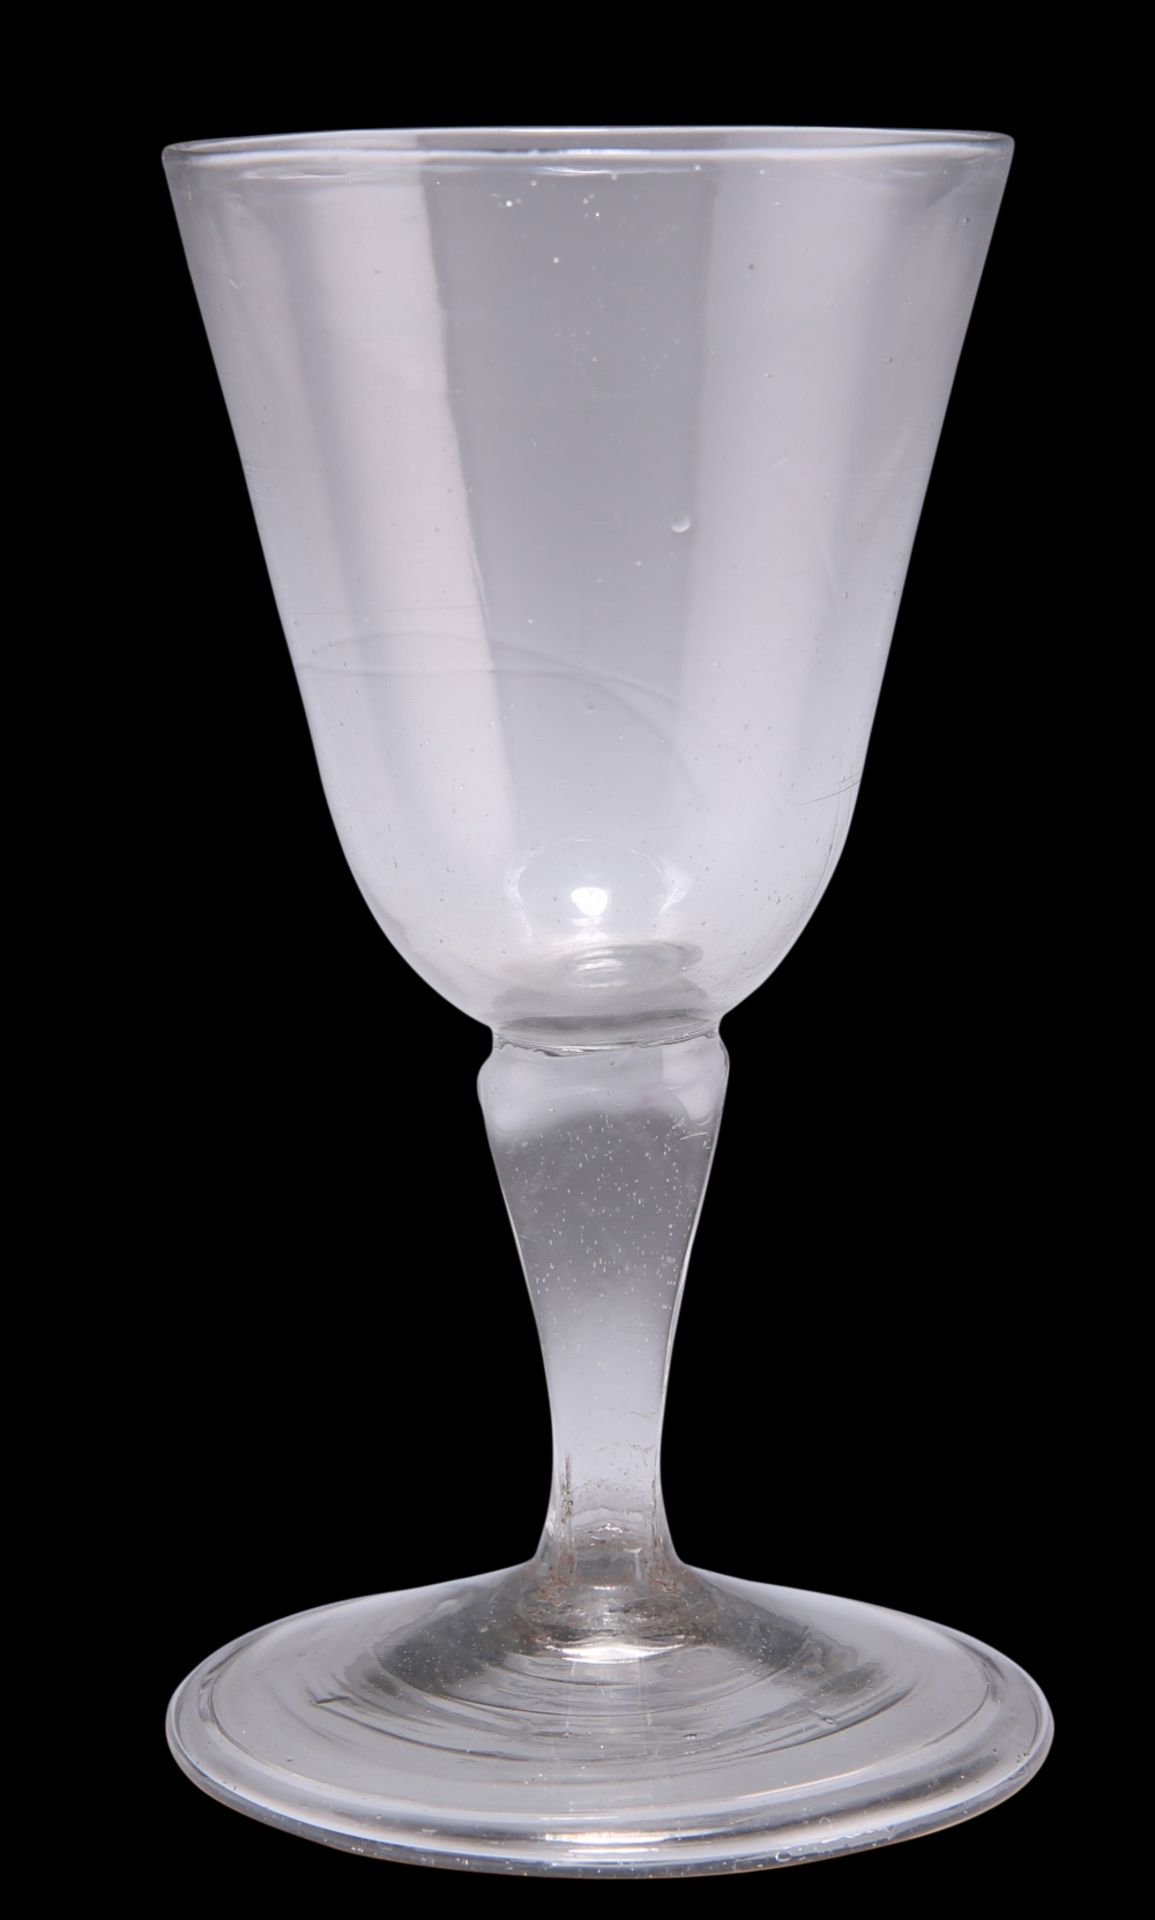 A SILESIAN STEM WINE GLASS, CIRCA 1760, with bucket bowl, of grey metal, on a folded foot. 11.5cm